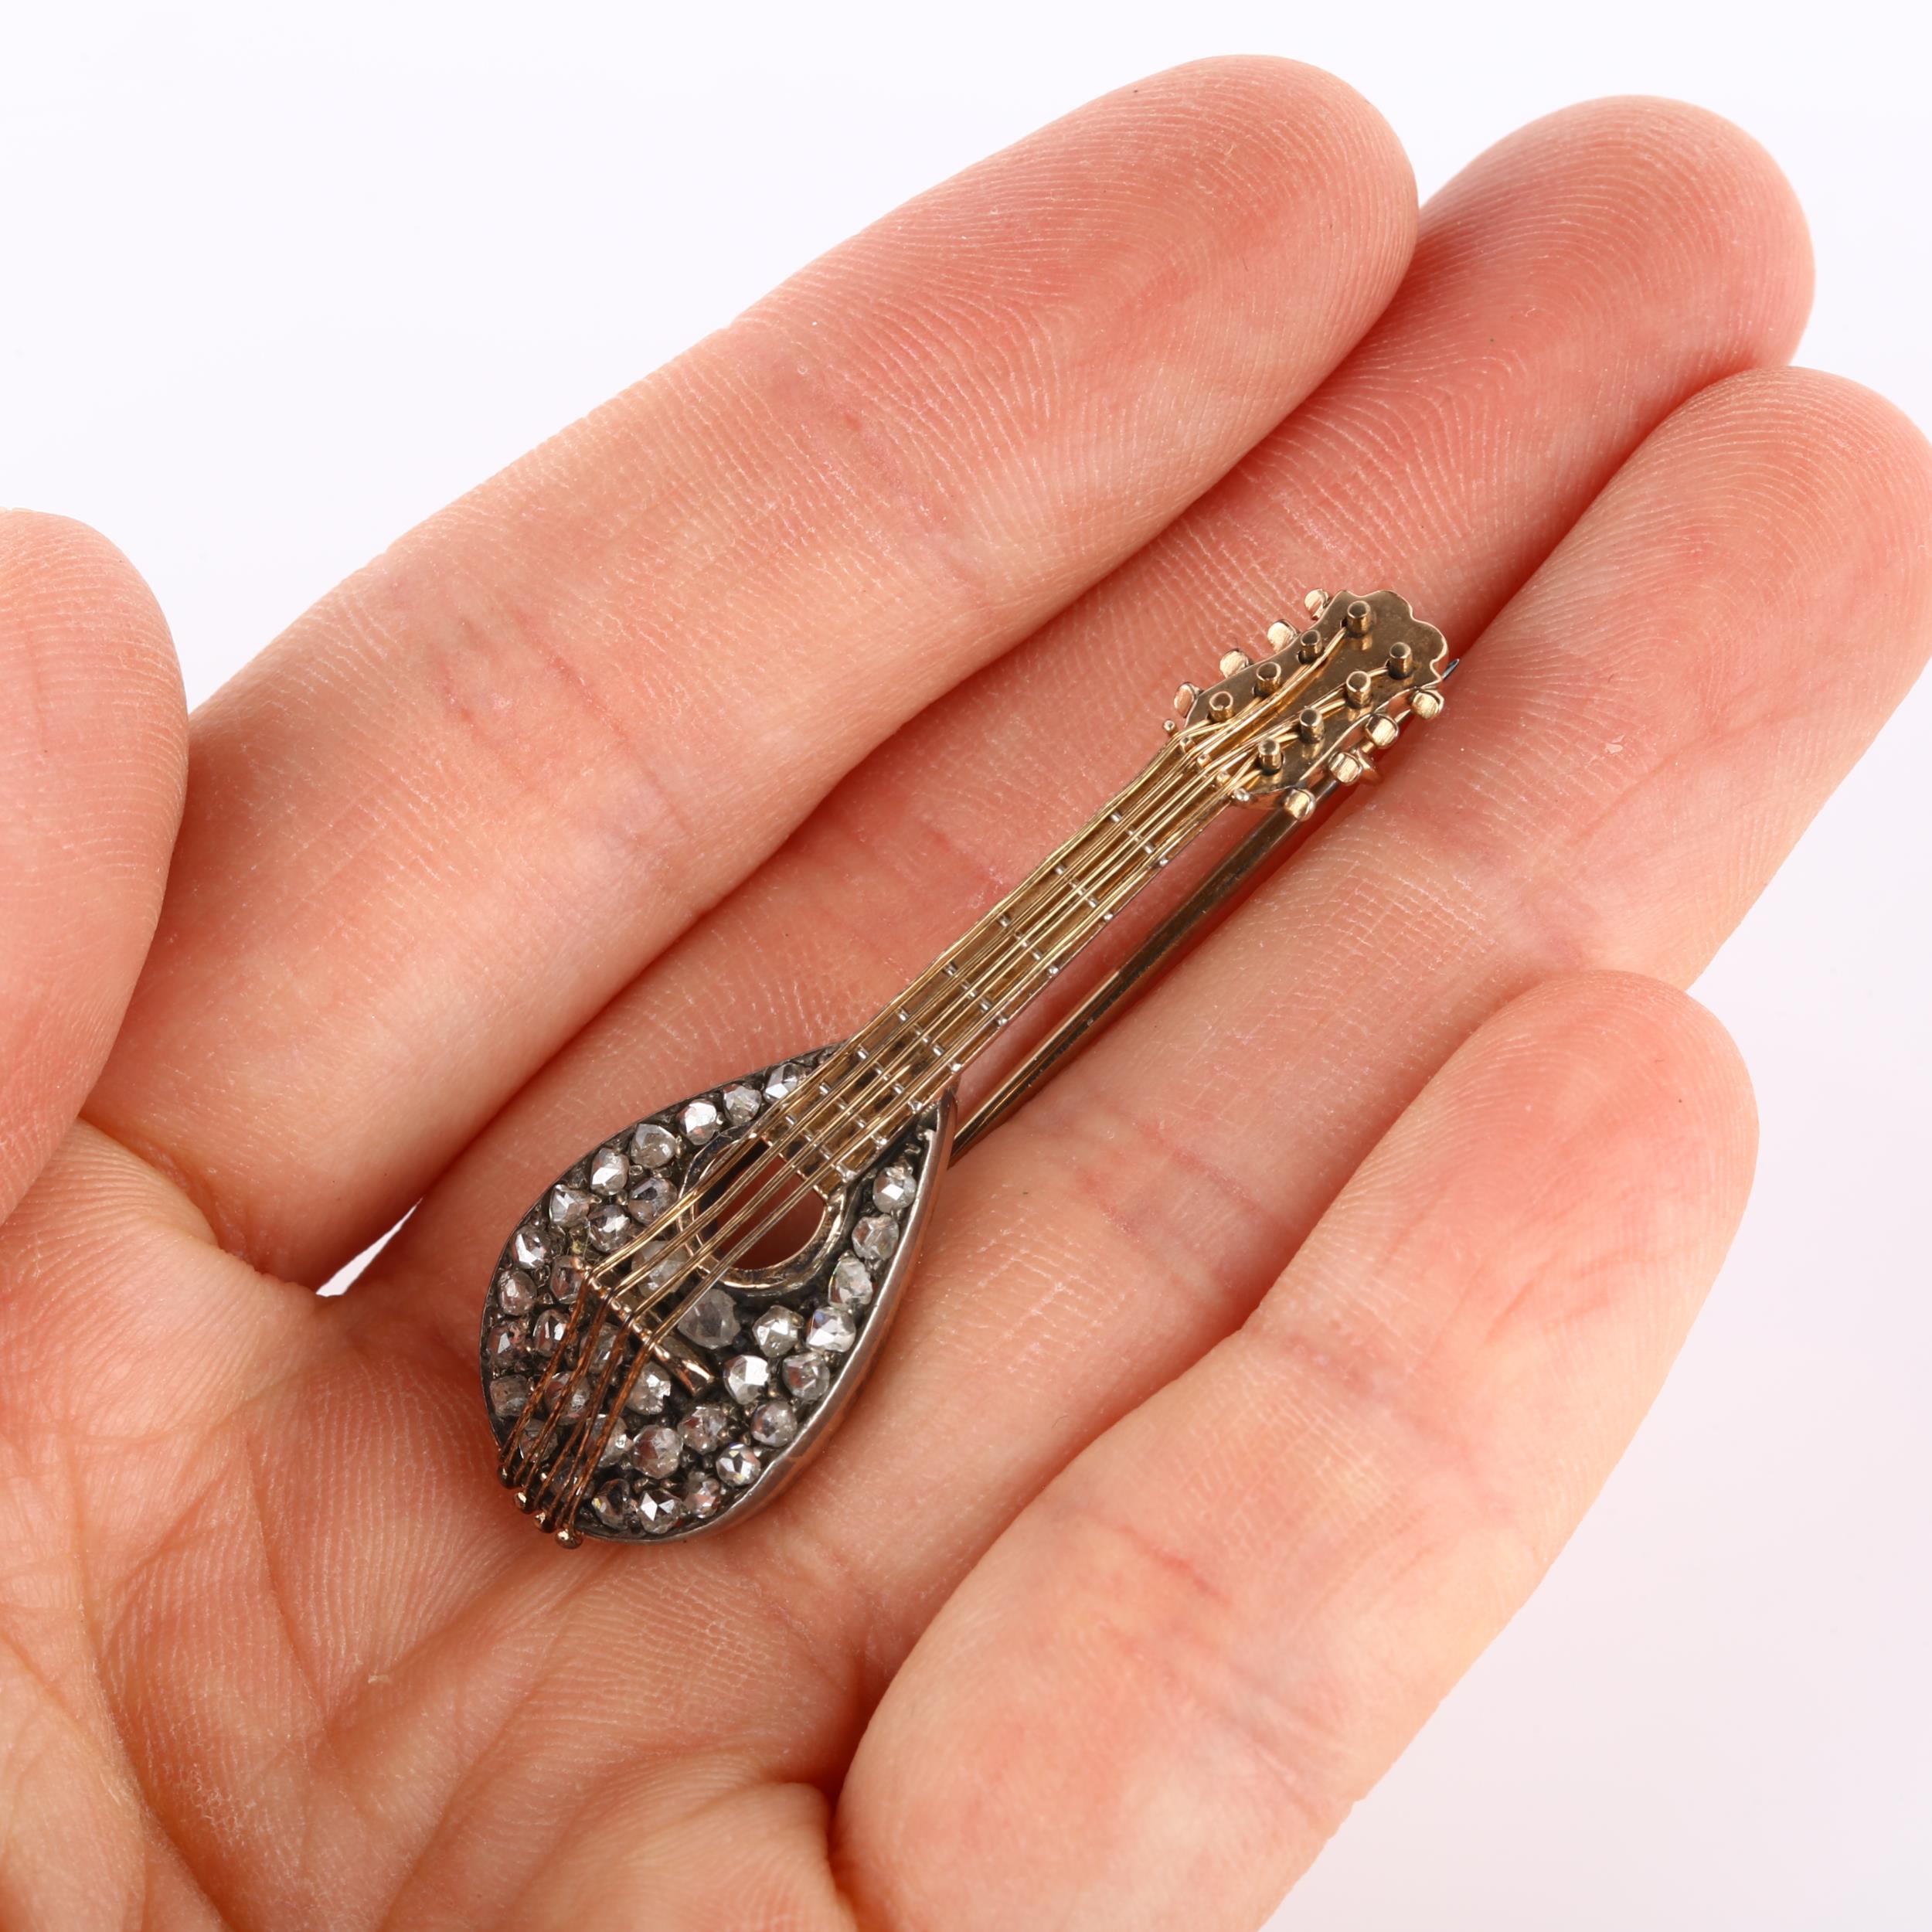 An Antique novelty diamond mandolin musical instrument brooch, circa 1900, unmarked rose gold and - Image 4 of 4